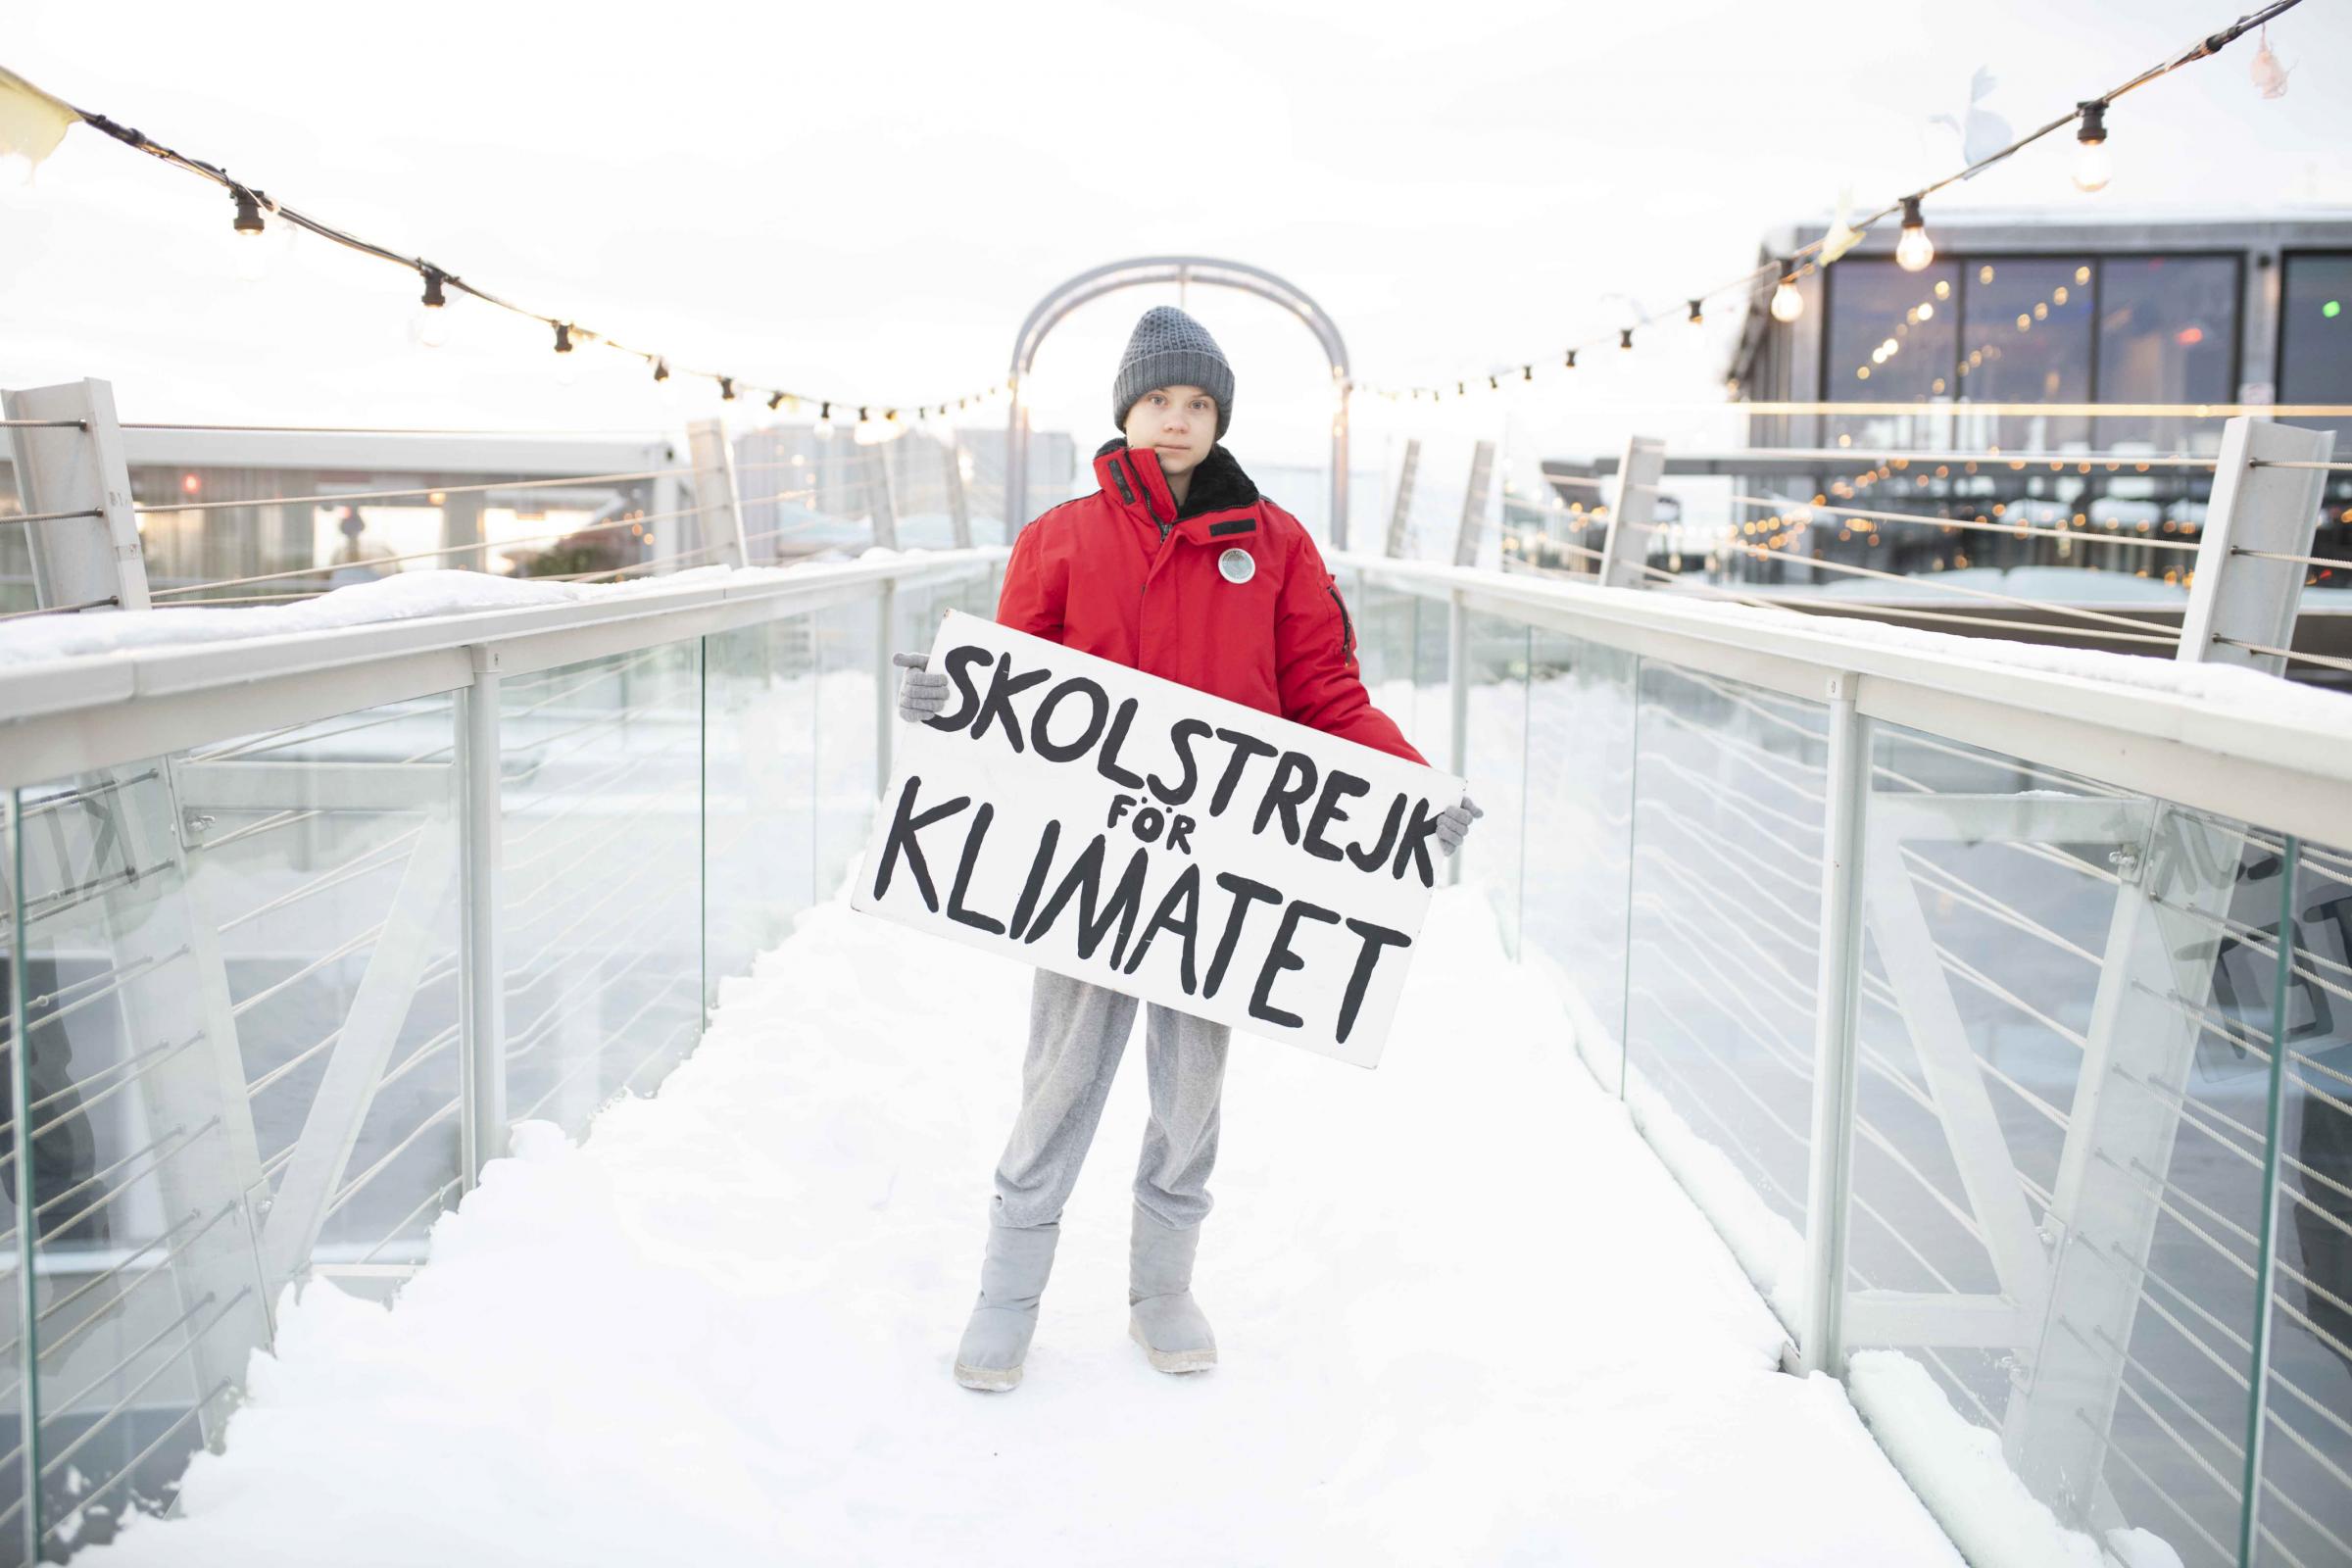 Greta Thunberg has said the only way forward in the fight against the climate change is to treat the crisis like a crisis